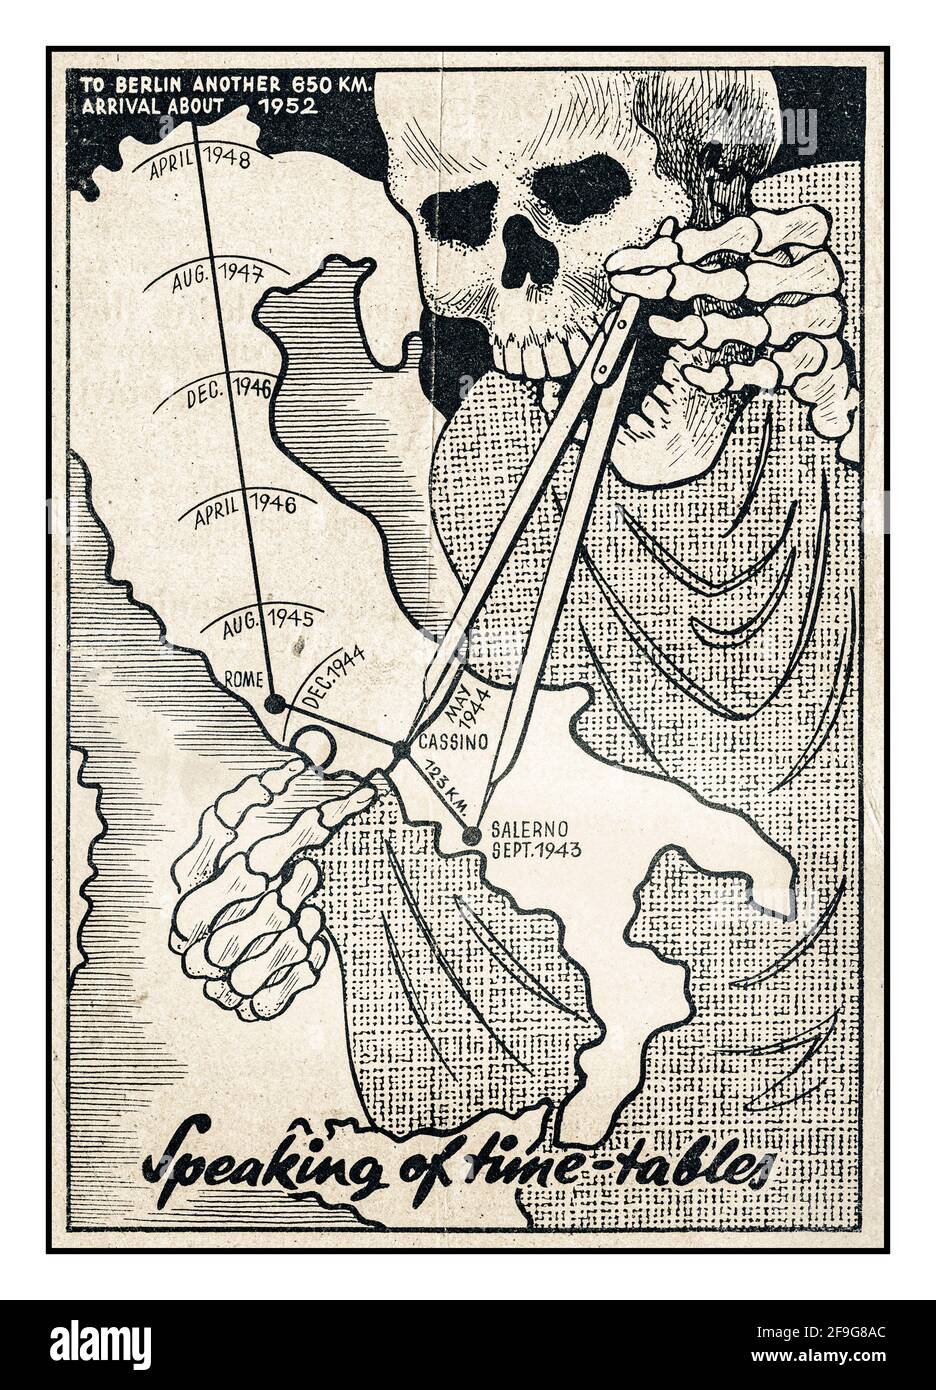 SPEAKING OF TIME TABLES Skull measuring Allied Advance in Italy Nazi Germany propaganda leaflet, aimed at allied forces at the end of the battle of Casino in May 1944. The allies had landed at Salerno in September 1943, and had been slowed in the fight to move north by terrain, weather and fierce German resistance. It had taken 8 months to gain 123 kilometers, and casualties had been high ('About 1000 casualties for each kilometre!'). The death's head on the map holds  calipers to measure the progress so far and apply it to the allied goal of occupying all of Italy and moving on to Berlin. Stock Photo